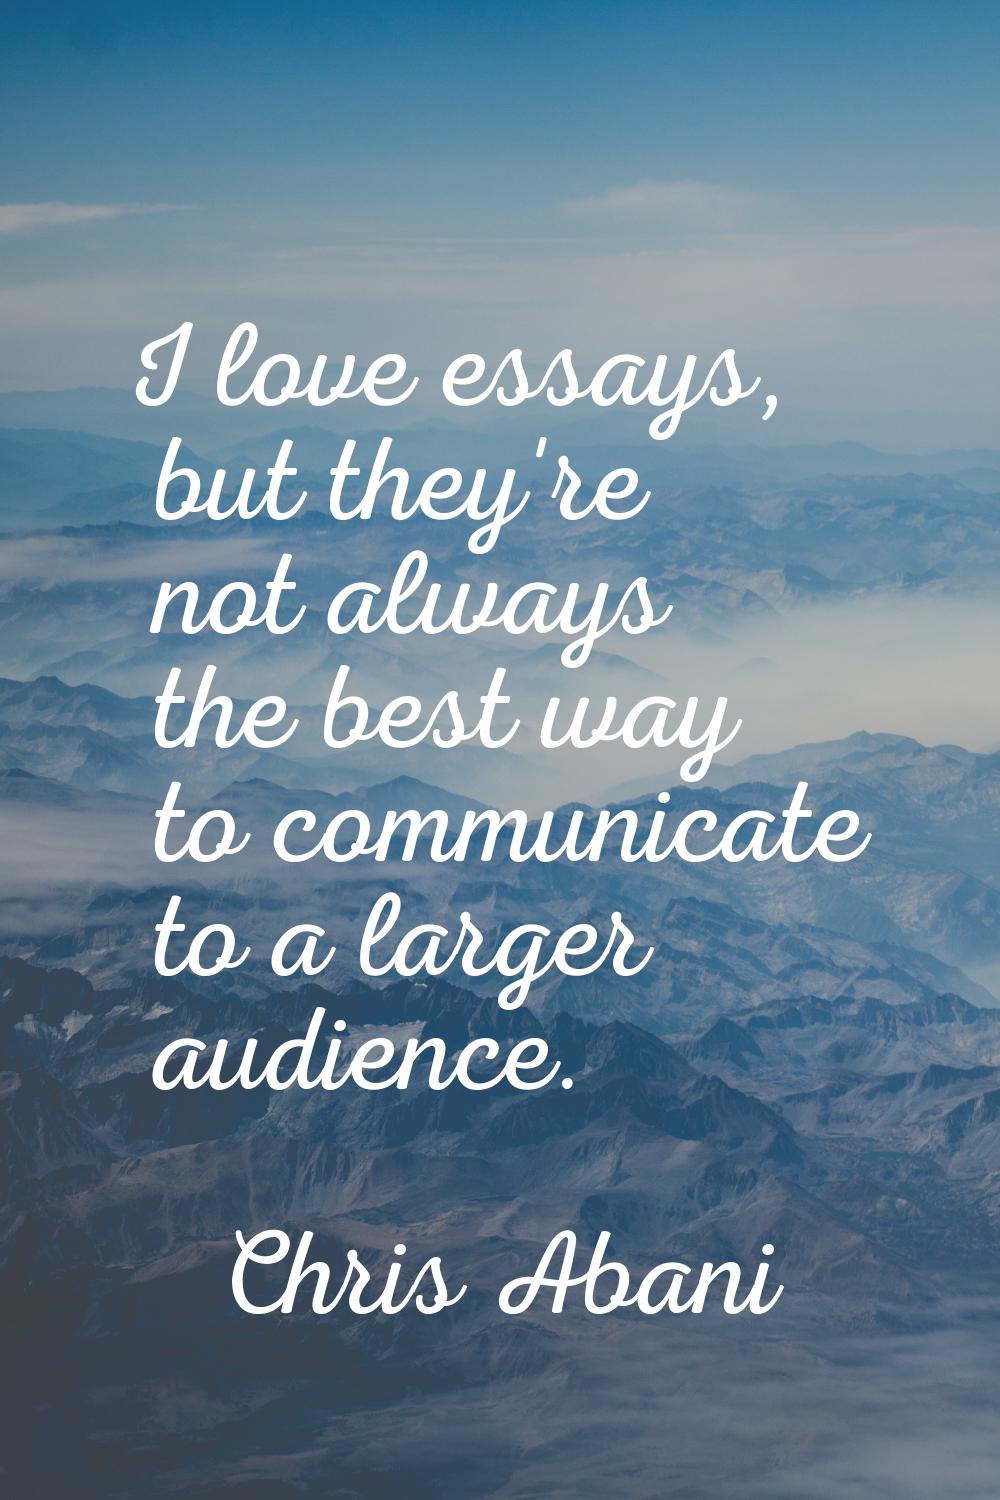 I love essays, but they're not always the best way to communicate to a larger audience.